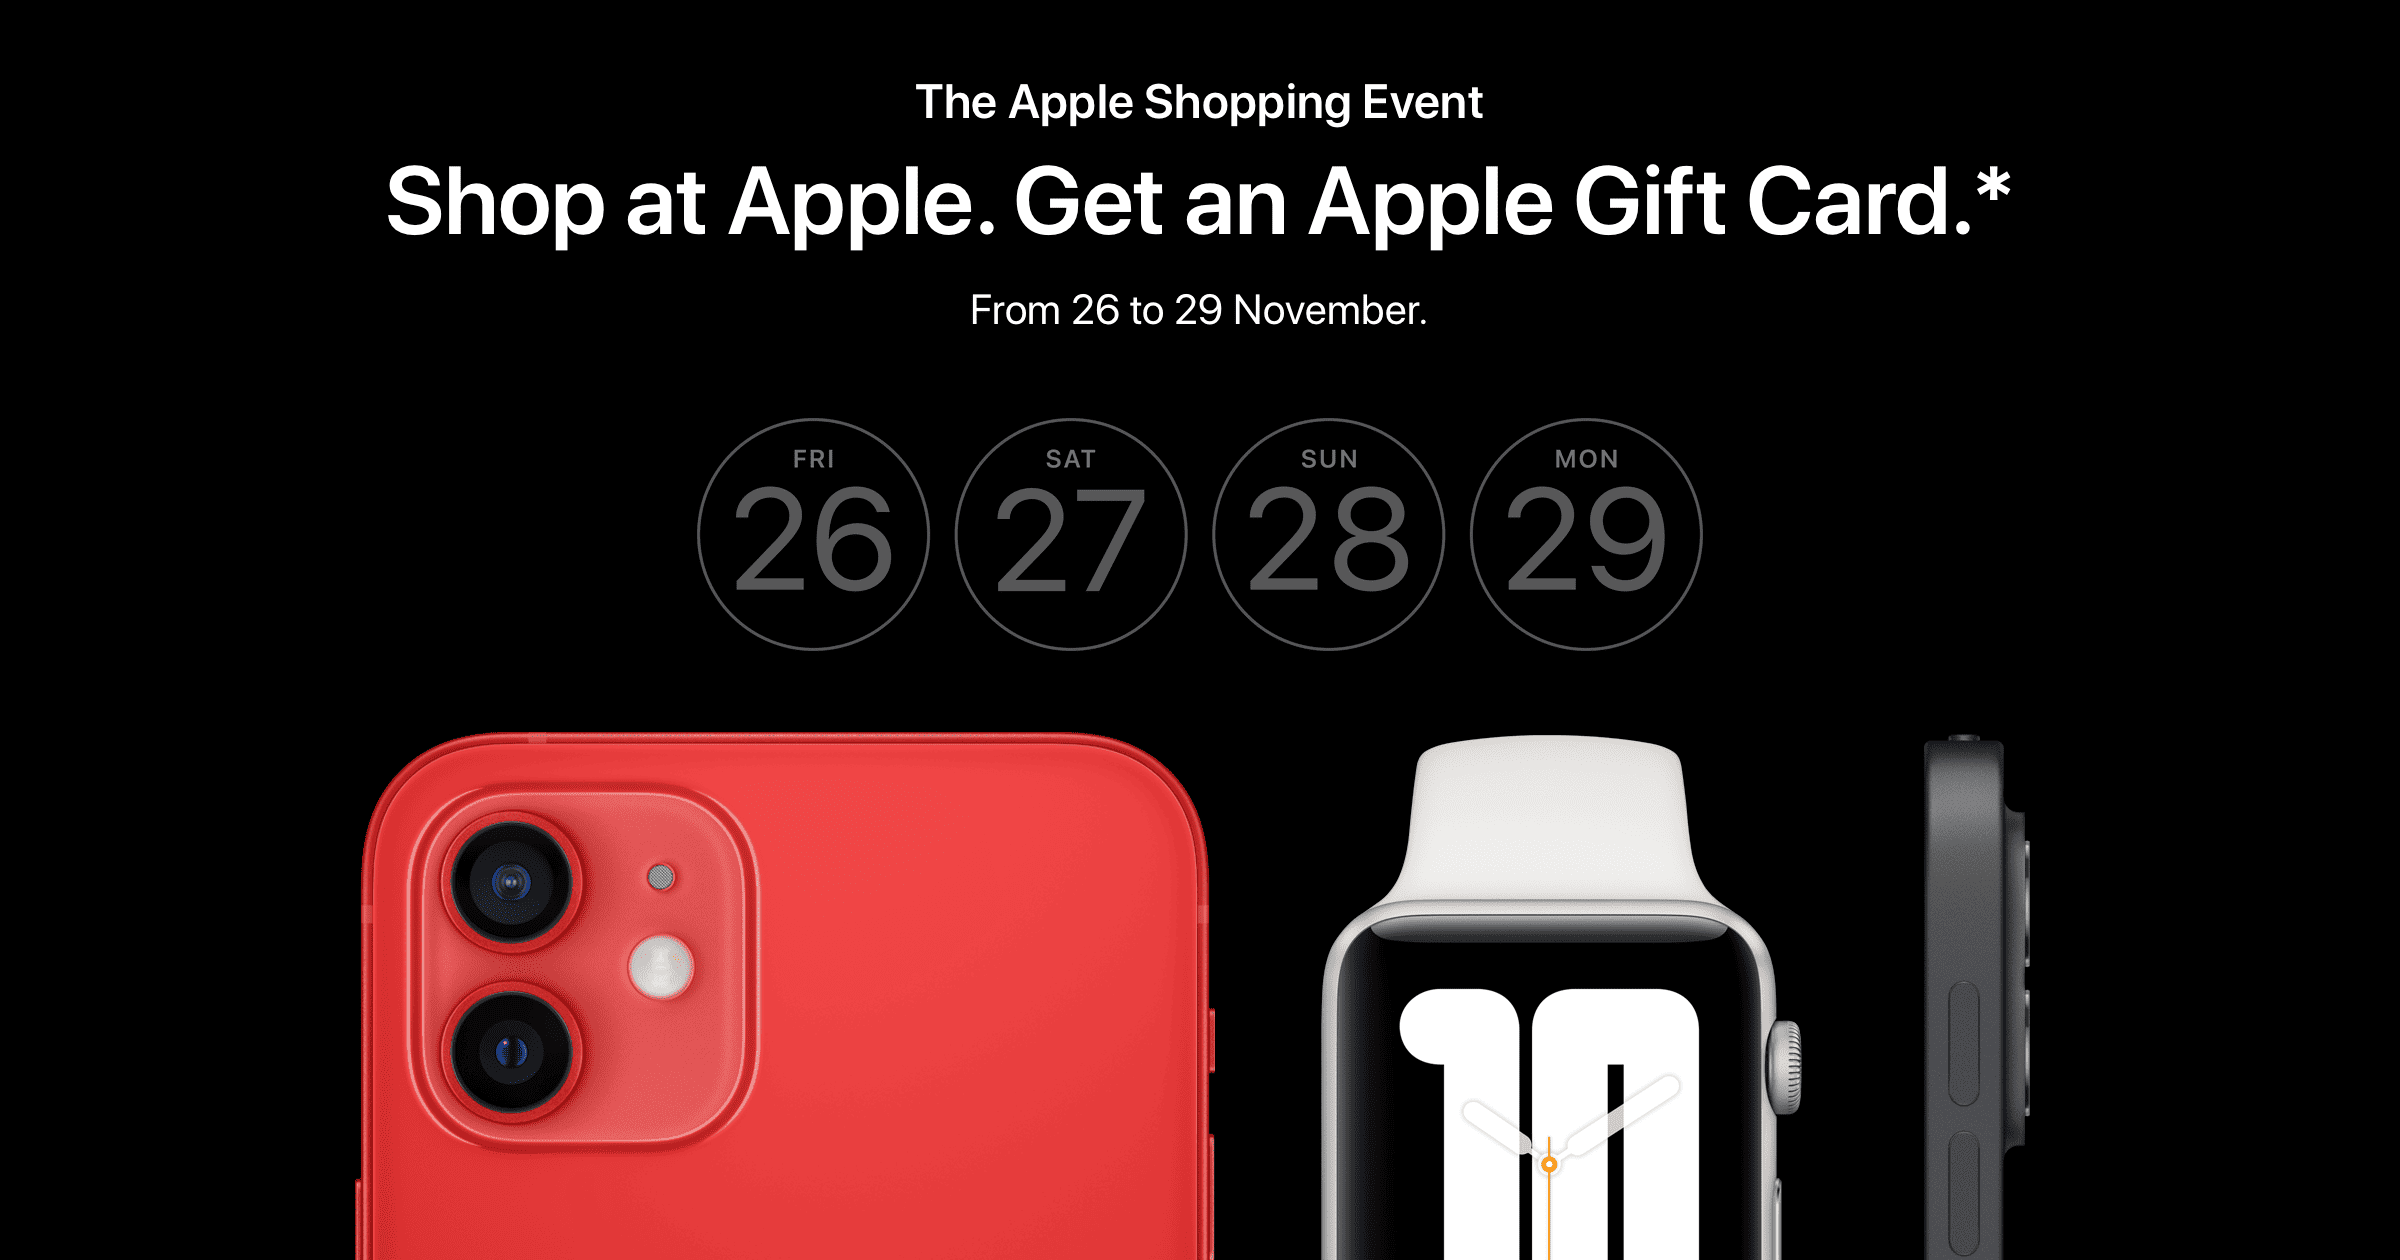 Last Day of Apple’s Black Friday – Cyber Monday 2021 Event